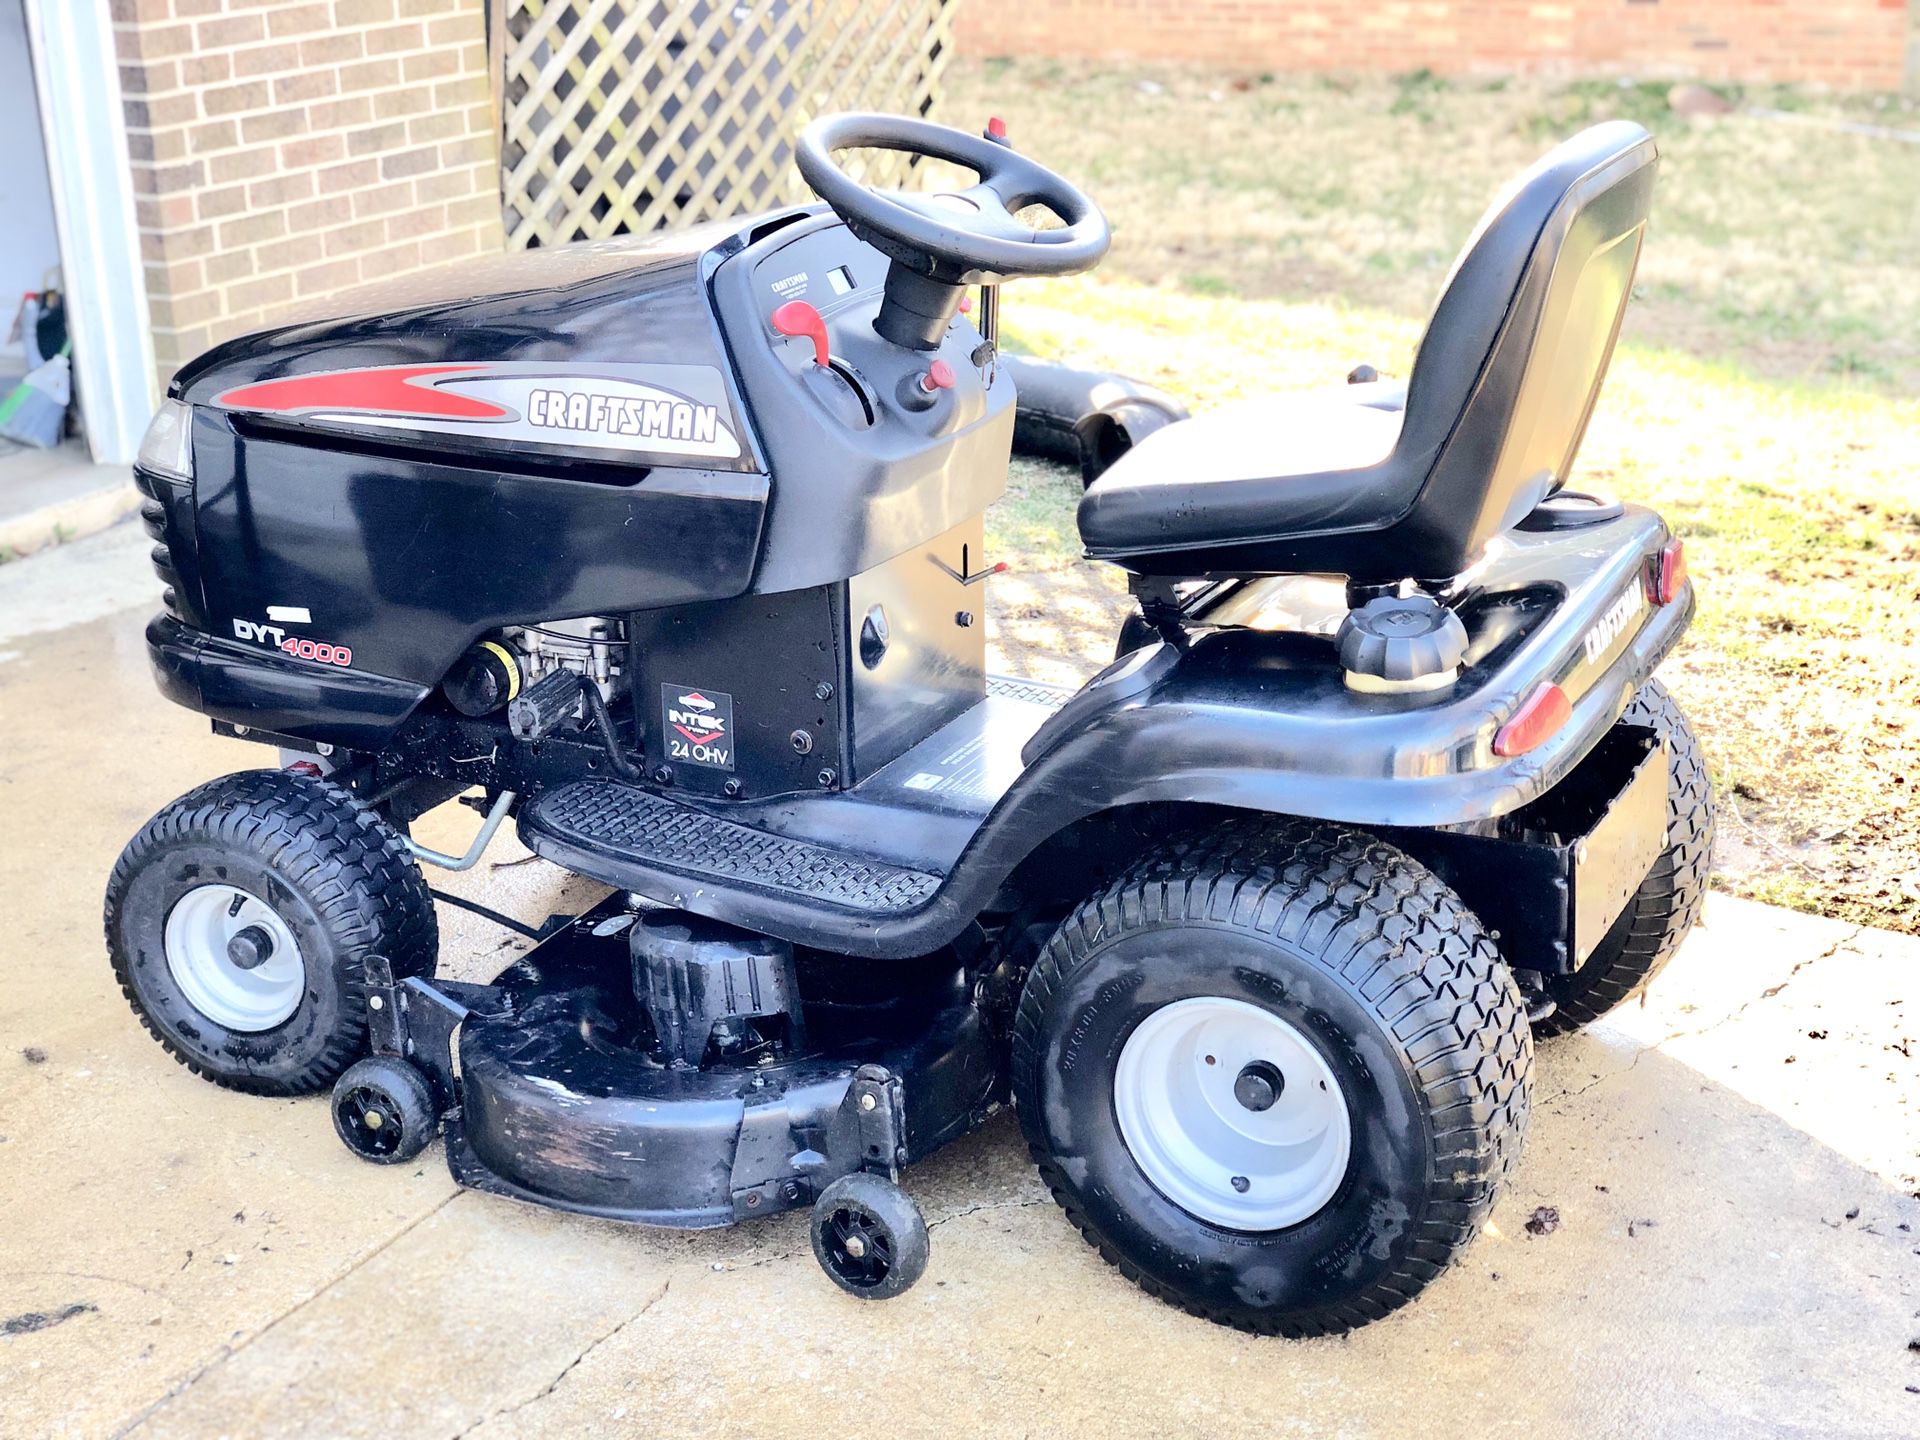 Craftsman Riding Mower with Bagger